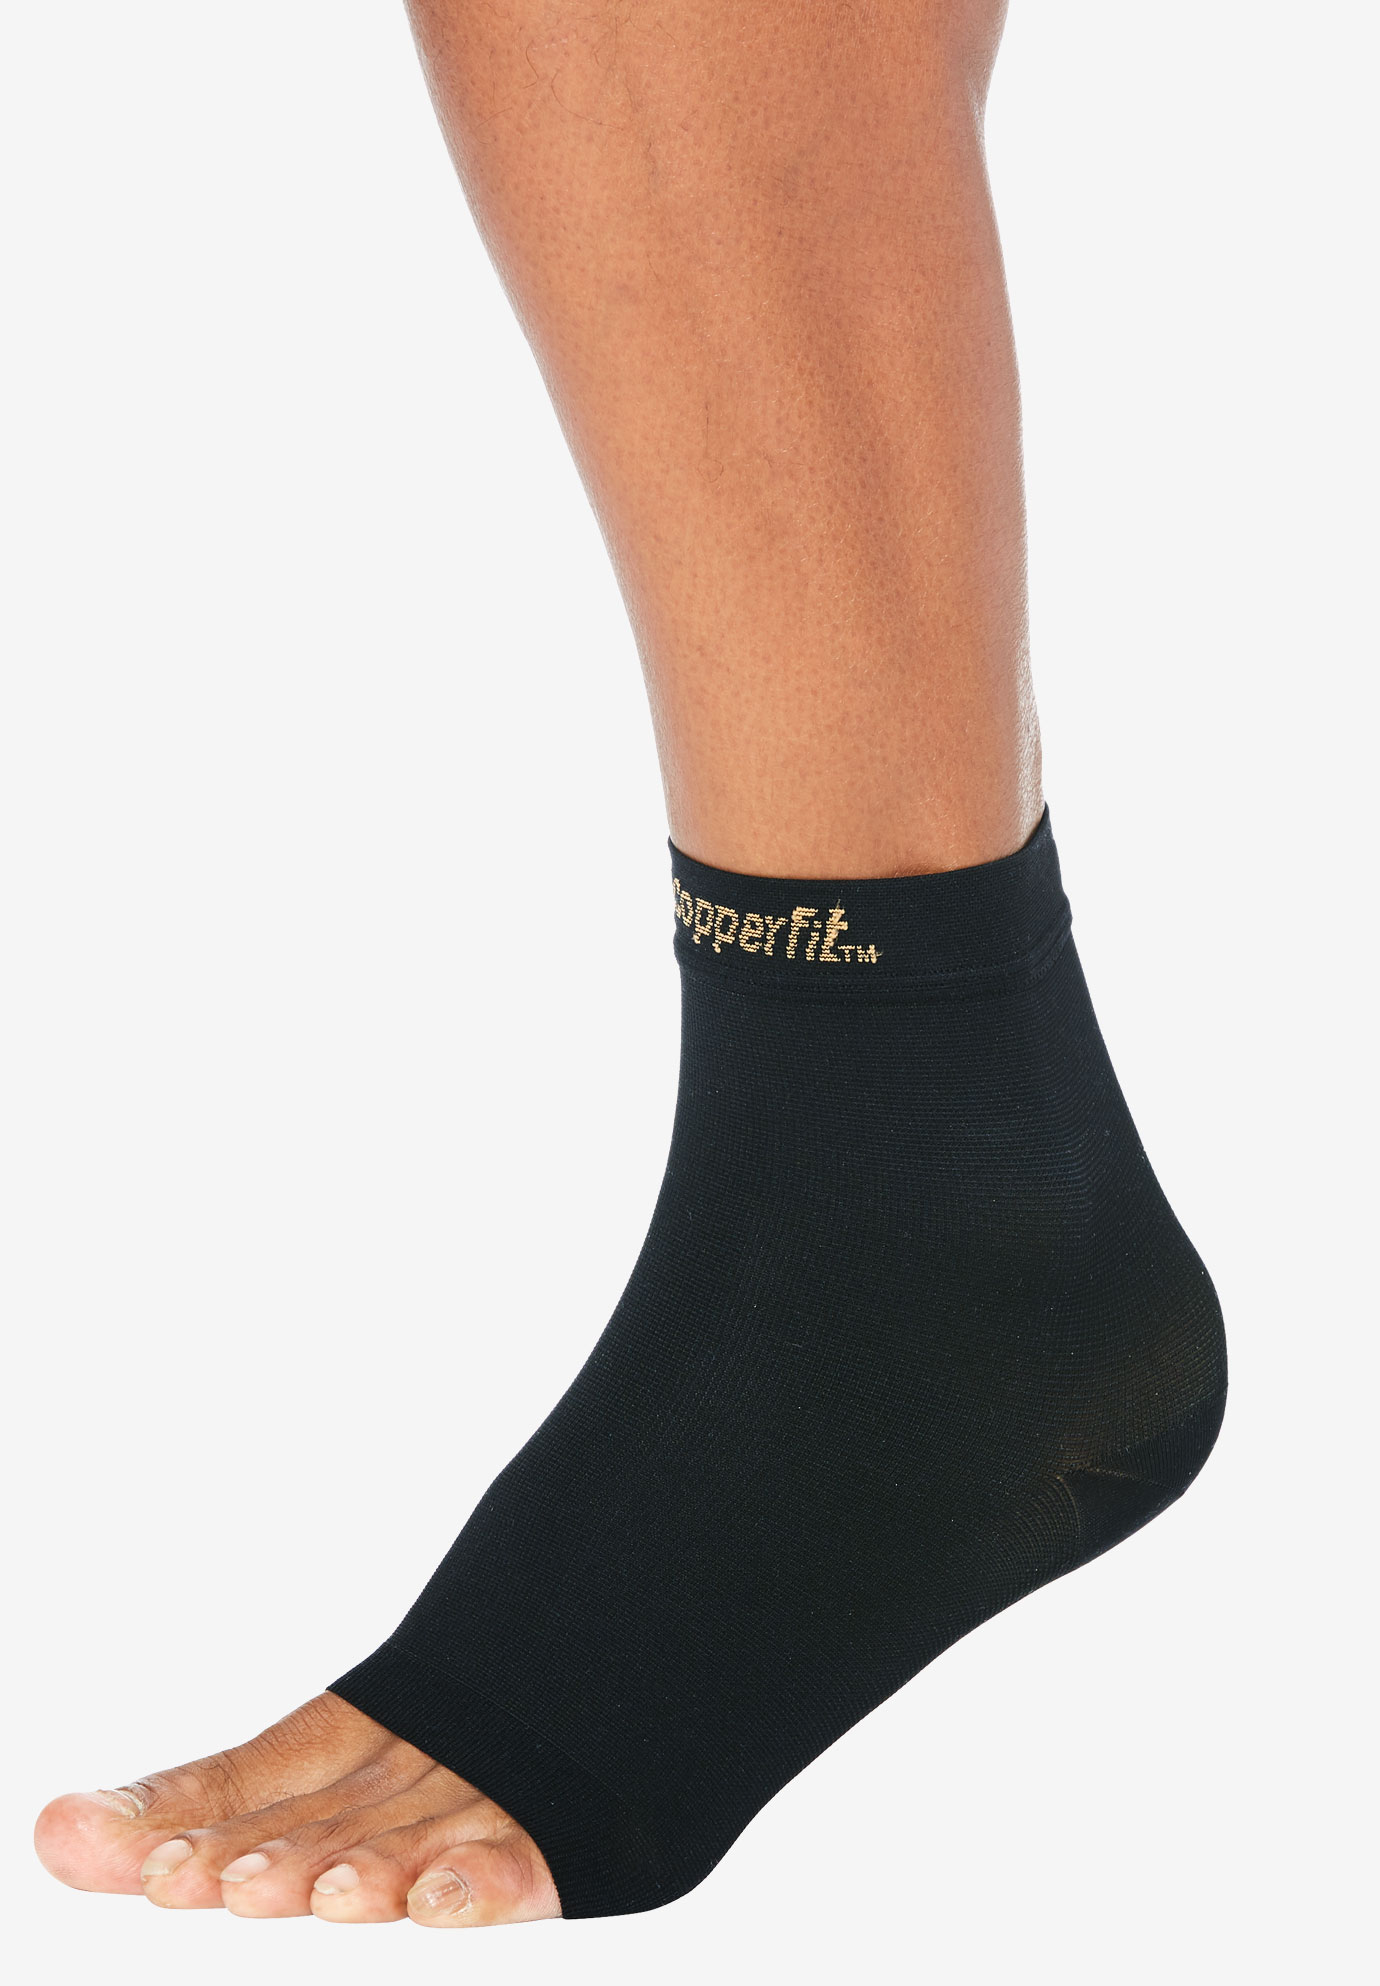 Copper Fit™ Compression Ankle Sleeve, 